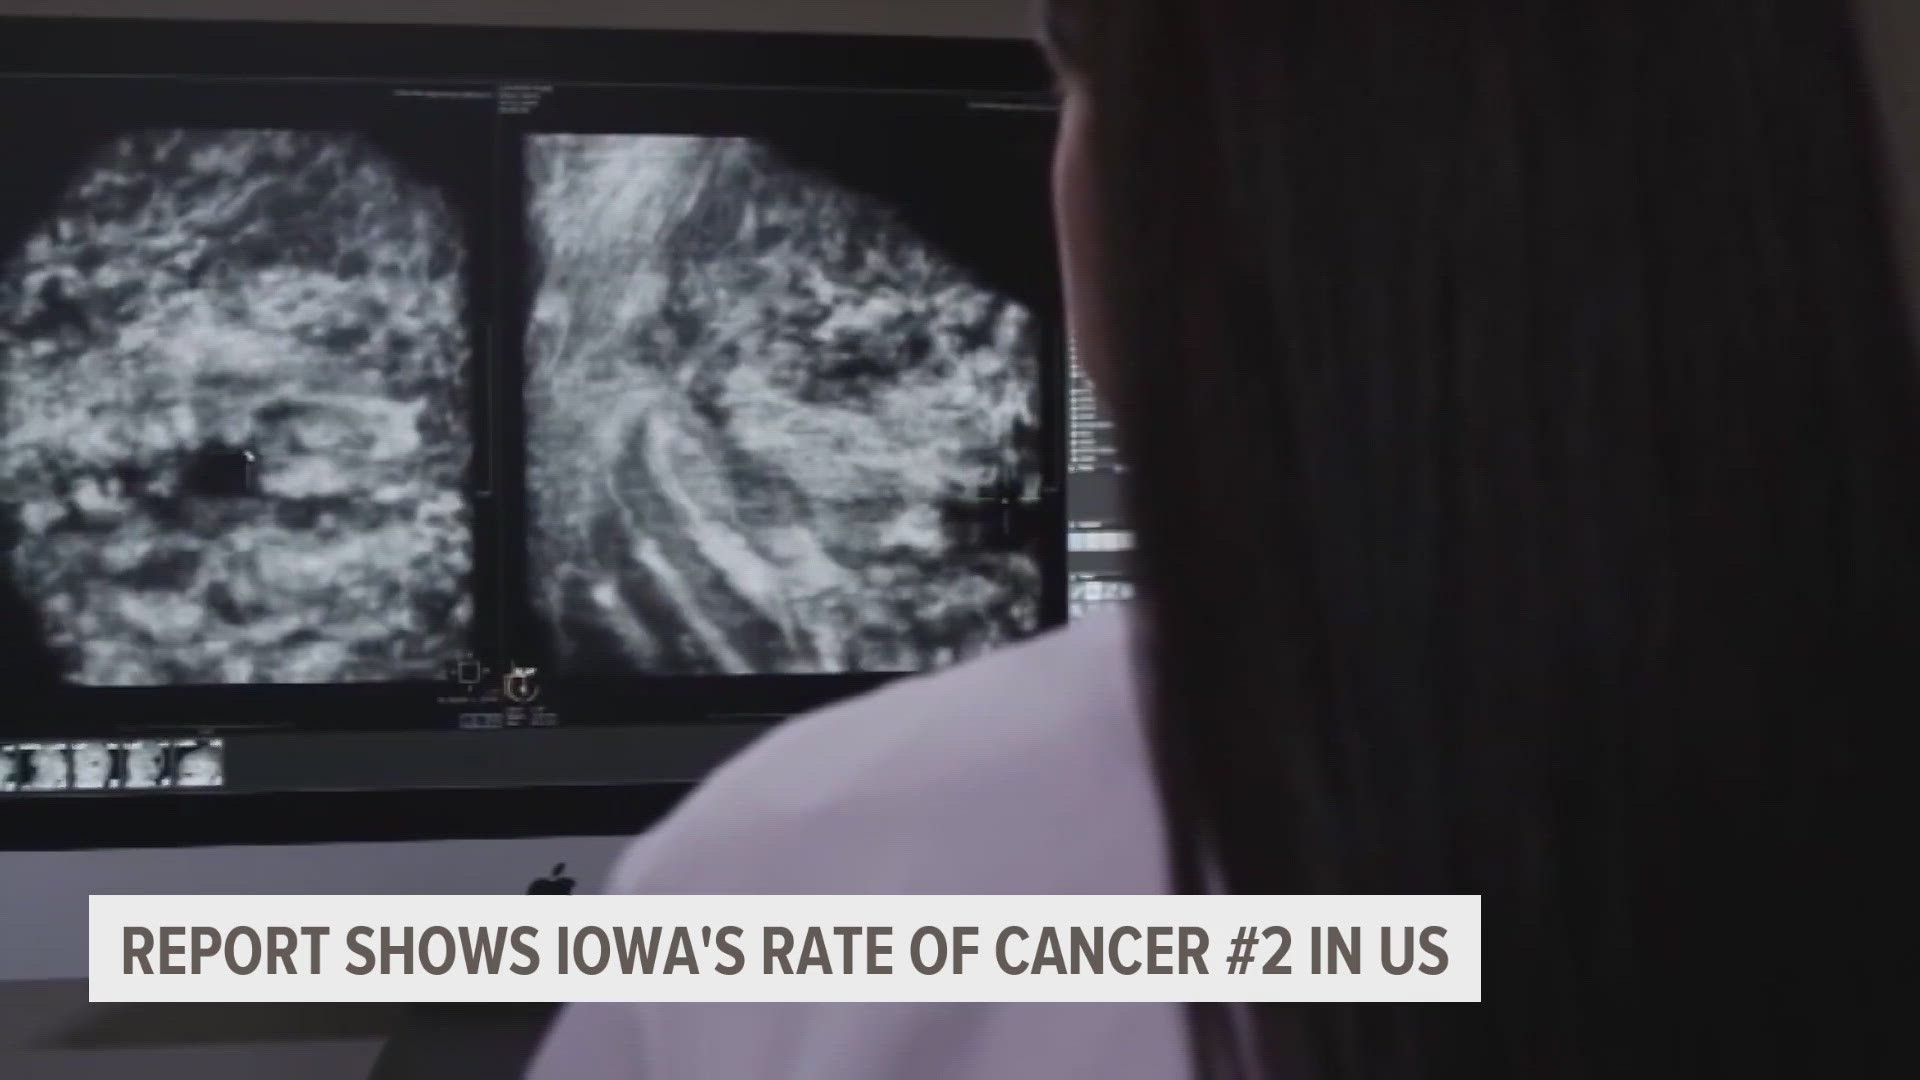 Local doctors are pointing to several risk factors that could be affecting Iowans.